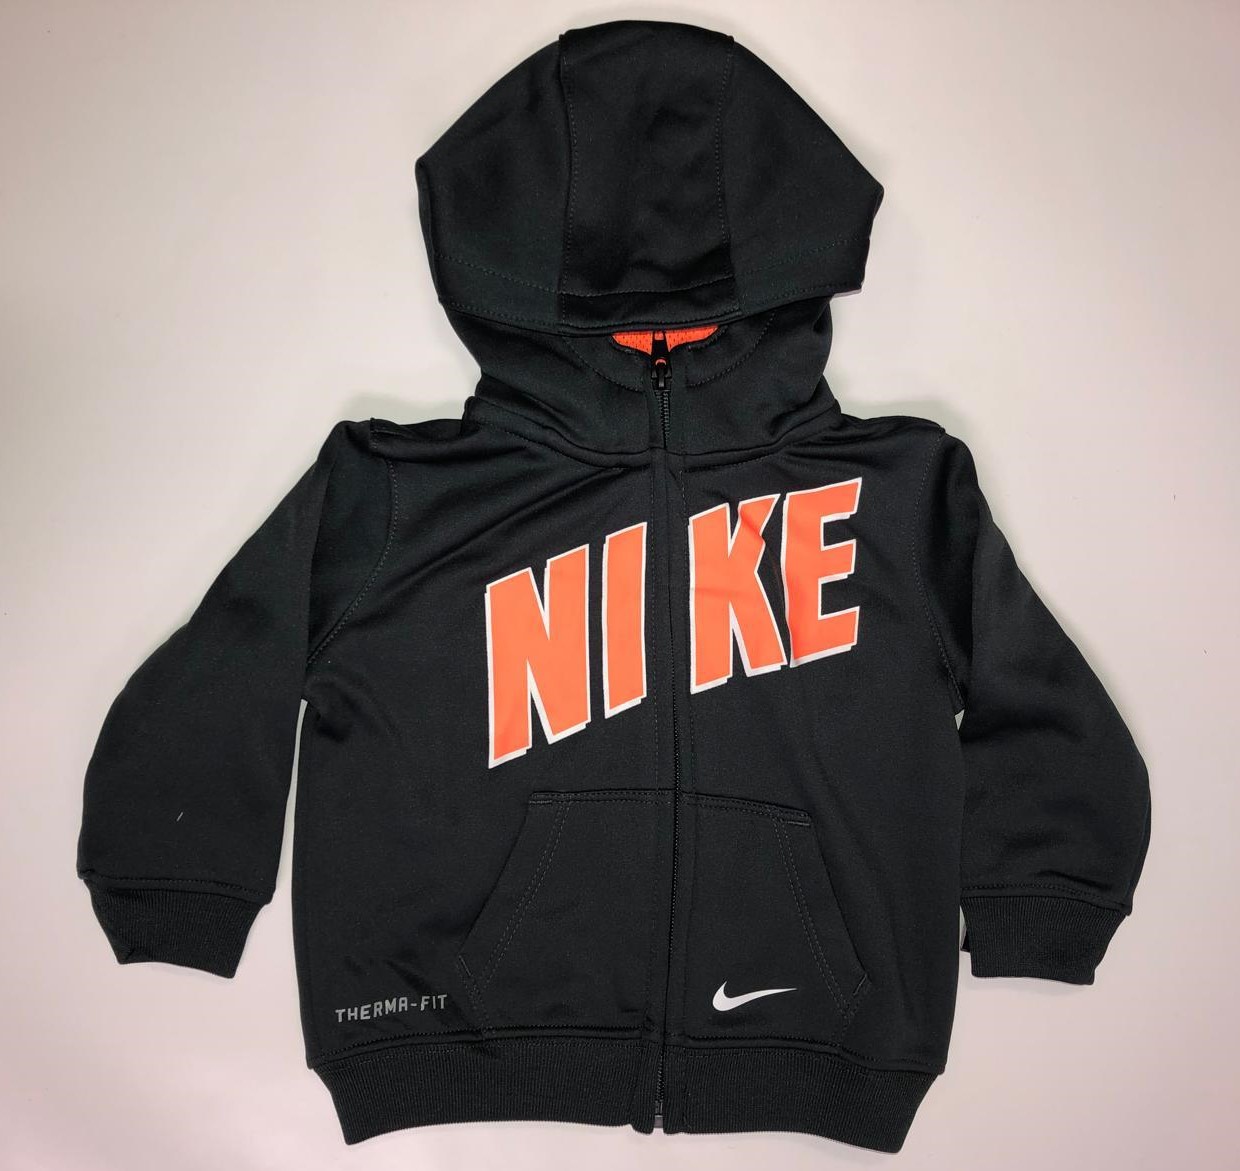 Nike Baby Boys' Therma-Fit 2-Piece Tracksuit, Anthracite, 12M - SRP $44 - image 3 of 8